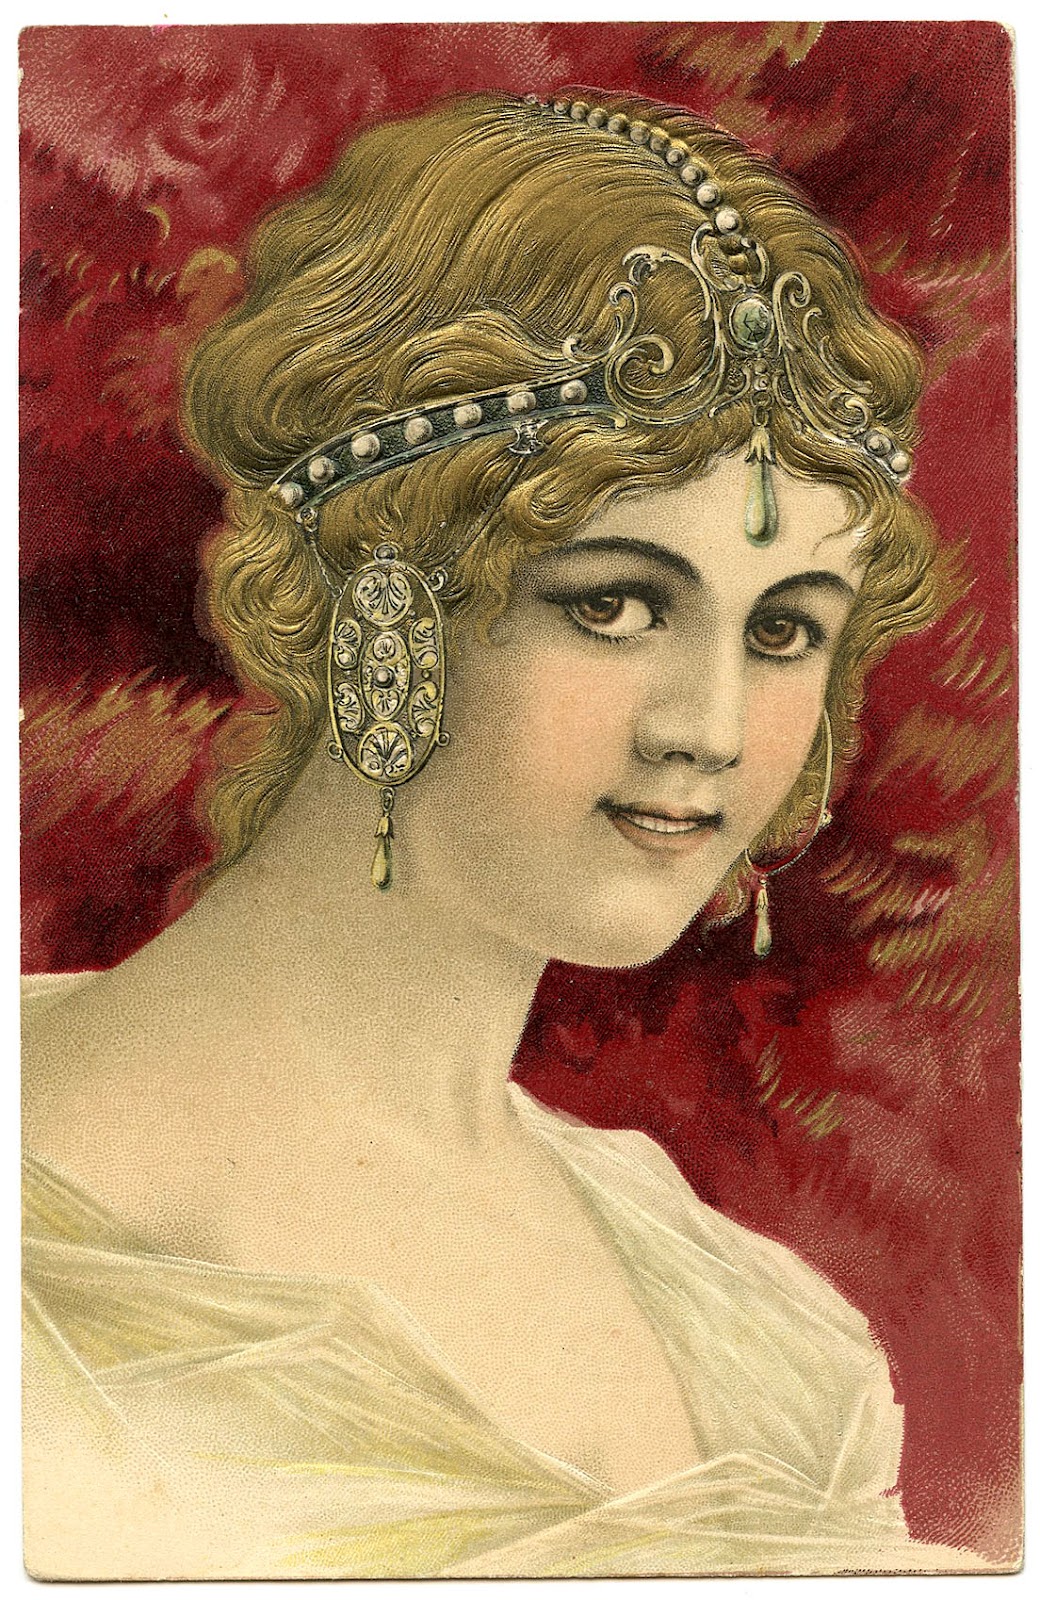 Art Nouveau Graphic - Beautiful Woman with Jewelry - The Graphics Fairy